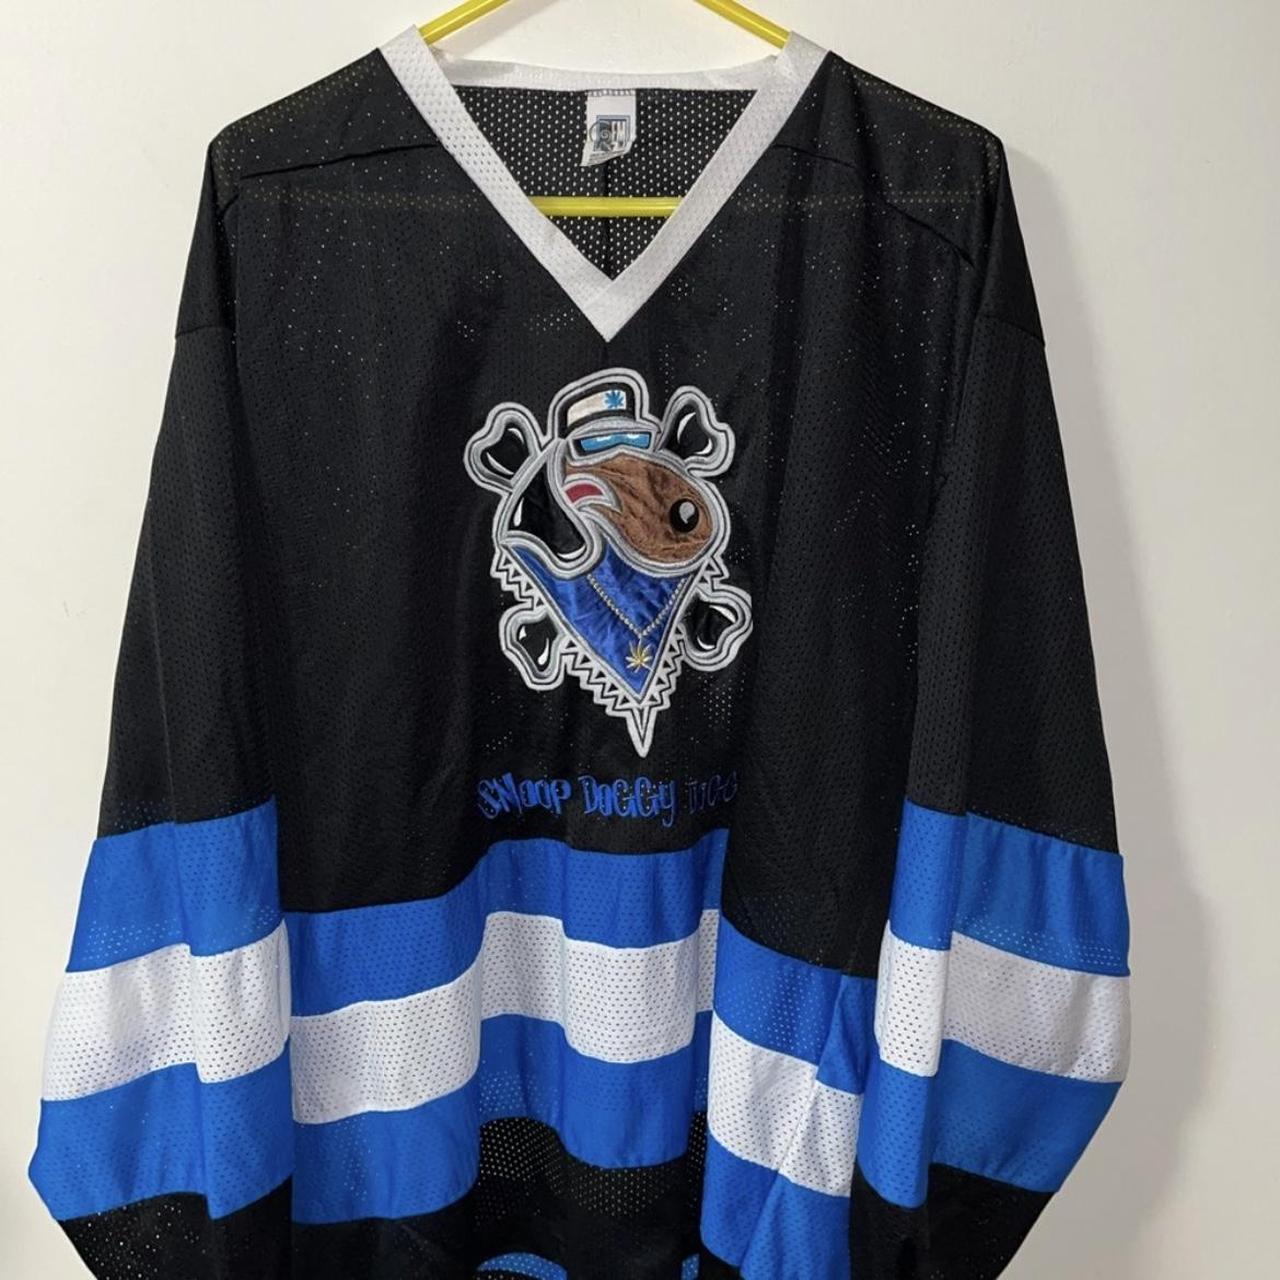 Vintage Snoop Doggy Dogg Hockey Jersey – For All To Envy